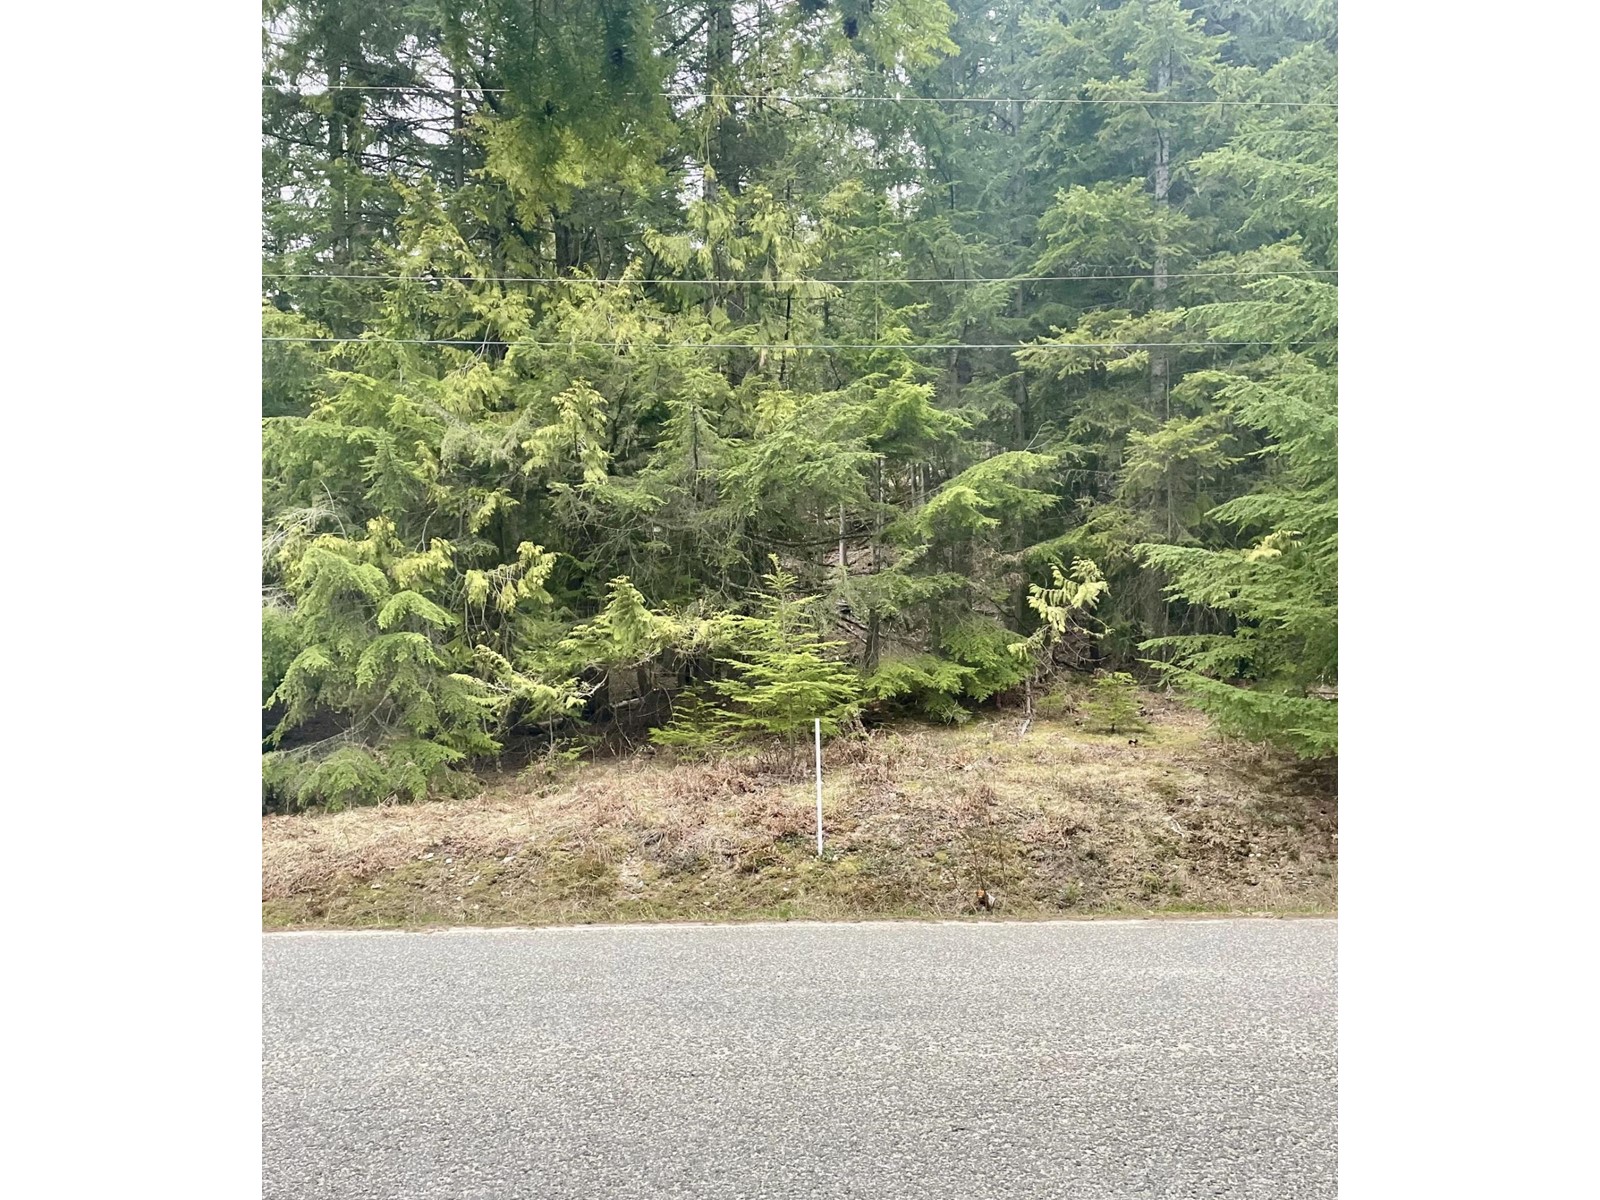  Lot 13 SLOCAN WEST ROAD, Nelson